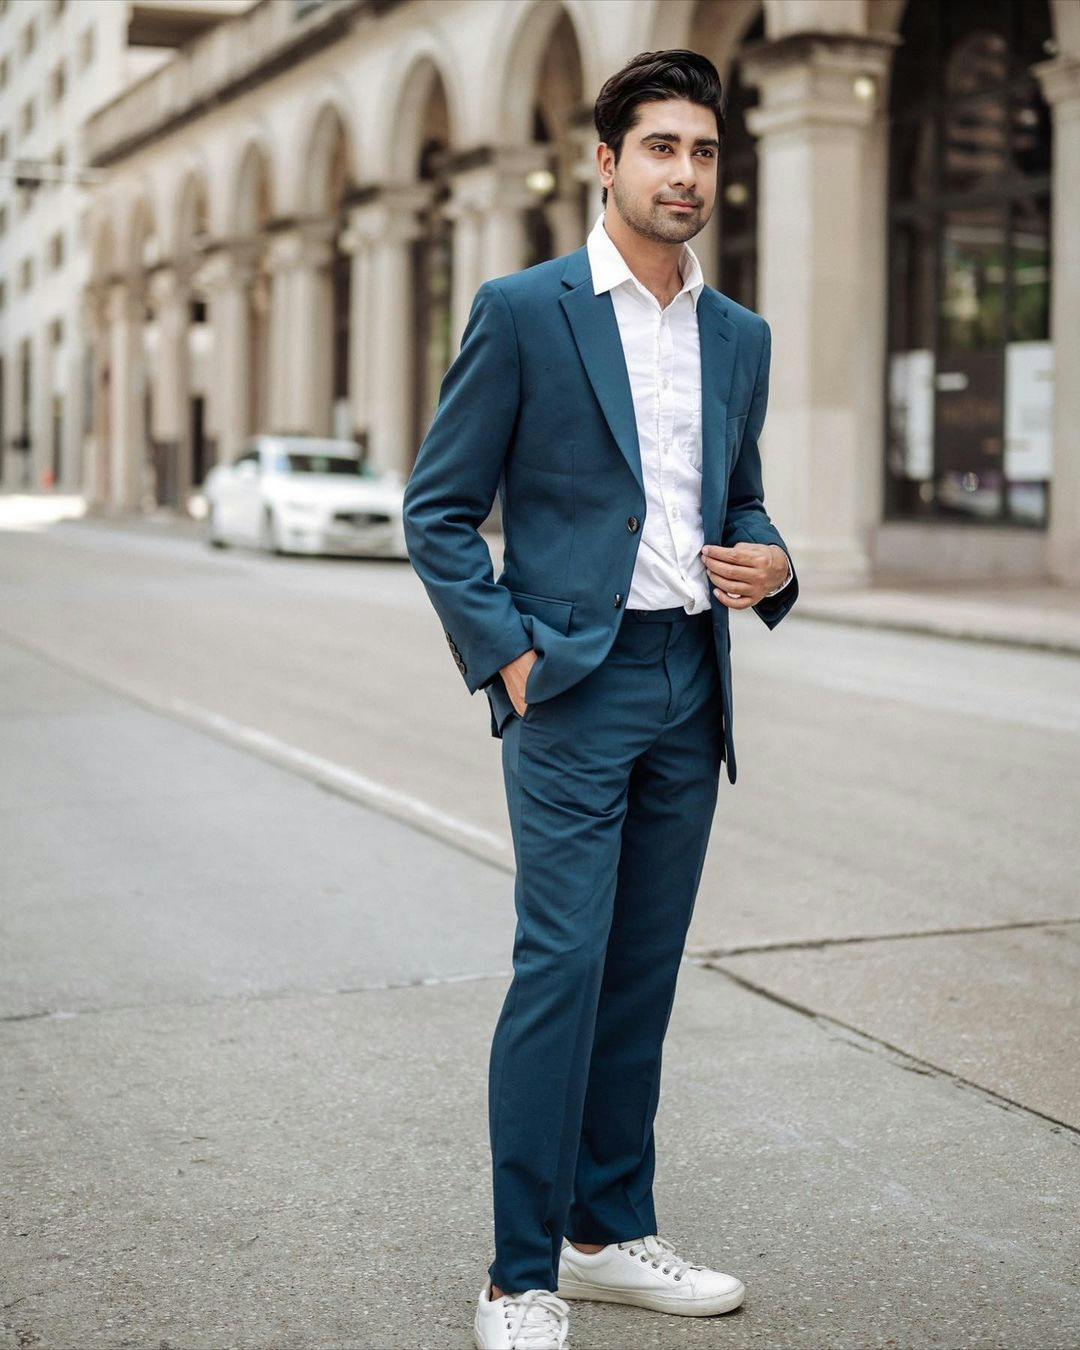 Bright and bold teal suit for men to add color to what to wear to work.